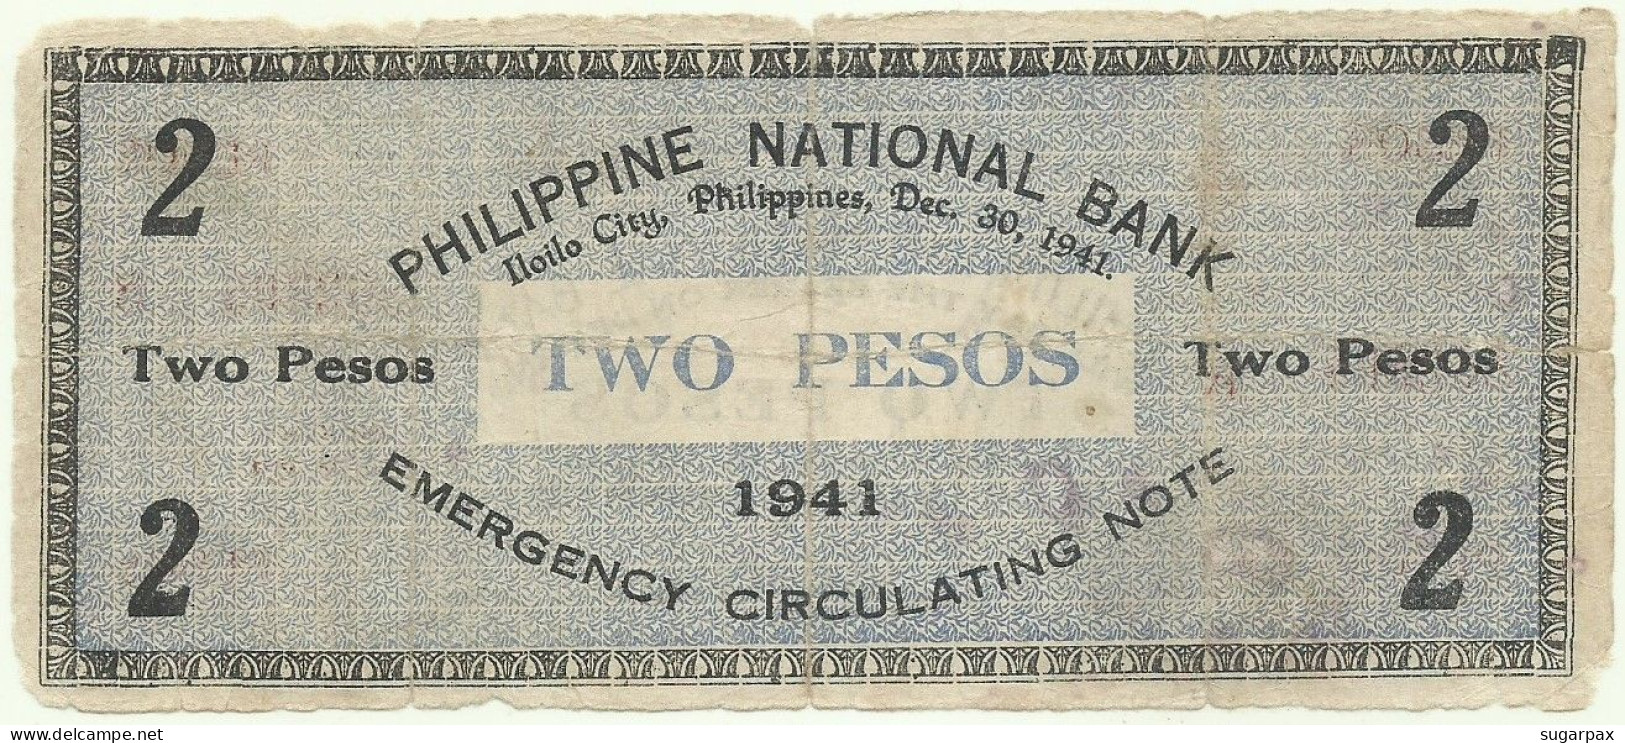 PHILIPPINES - 2 Pesos - 1941 - Pick S 306 - Serie R - ILOILO Currency Committee - Philippinen